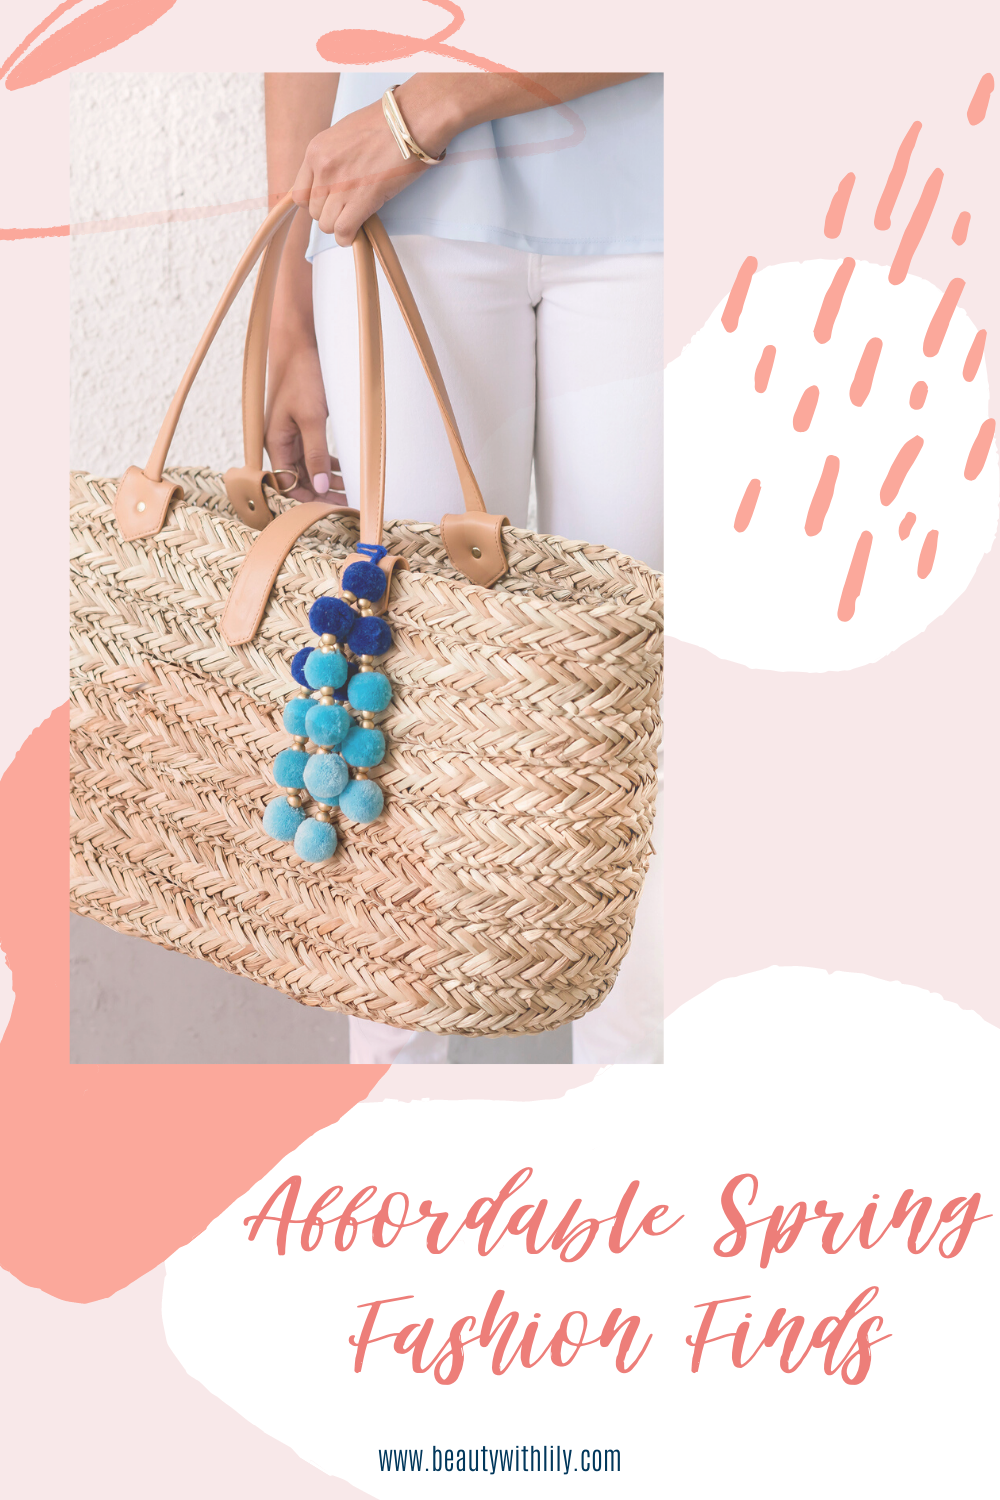 The Best Spring Fashion Finds on Amazon // Affordable Spring Fashion // Spring Outfit Ideas // Outfit Inspiration // Summer Fashion // Amazon Finds | Beauty With Lily #springfashion #amazonfinds #outfitideas